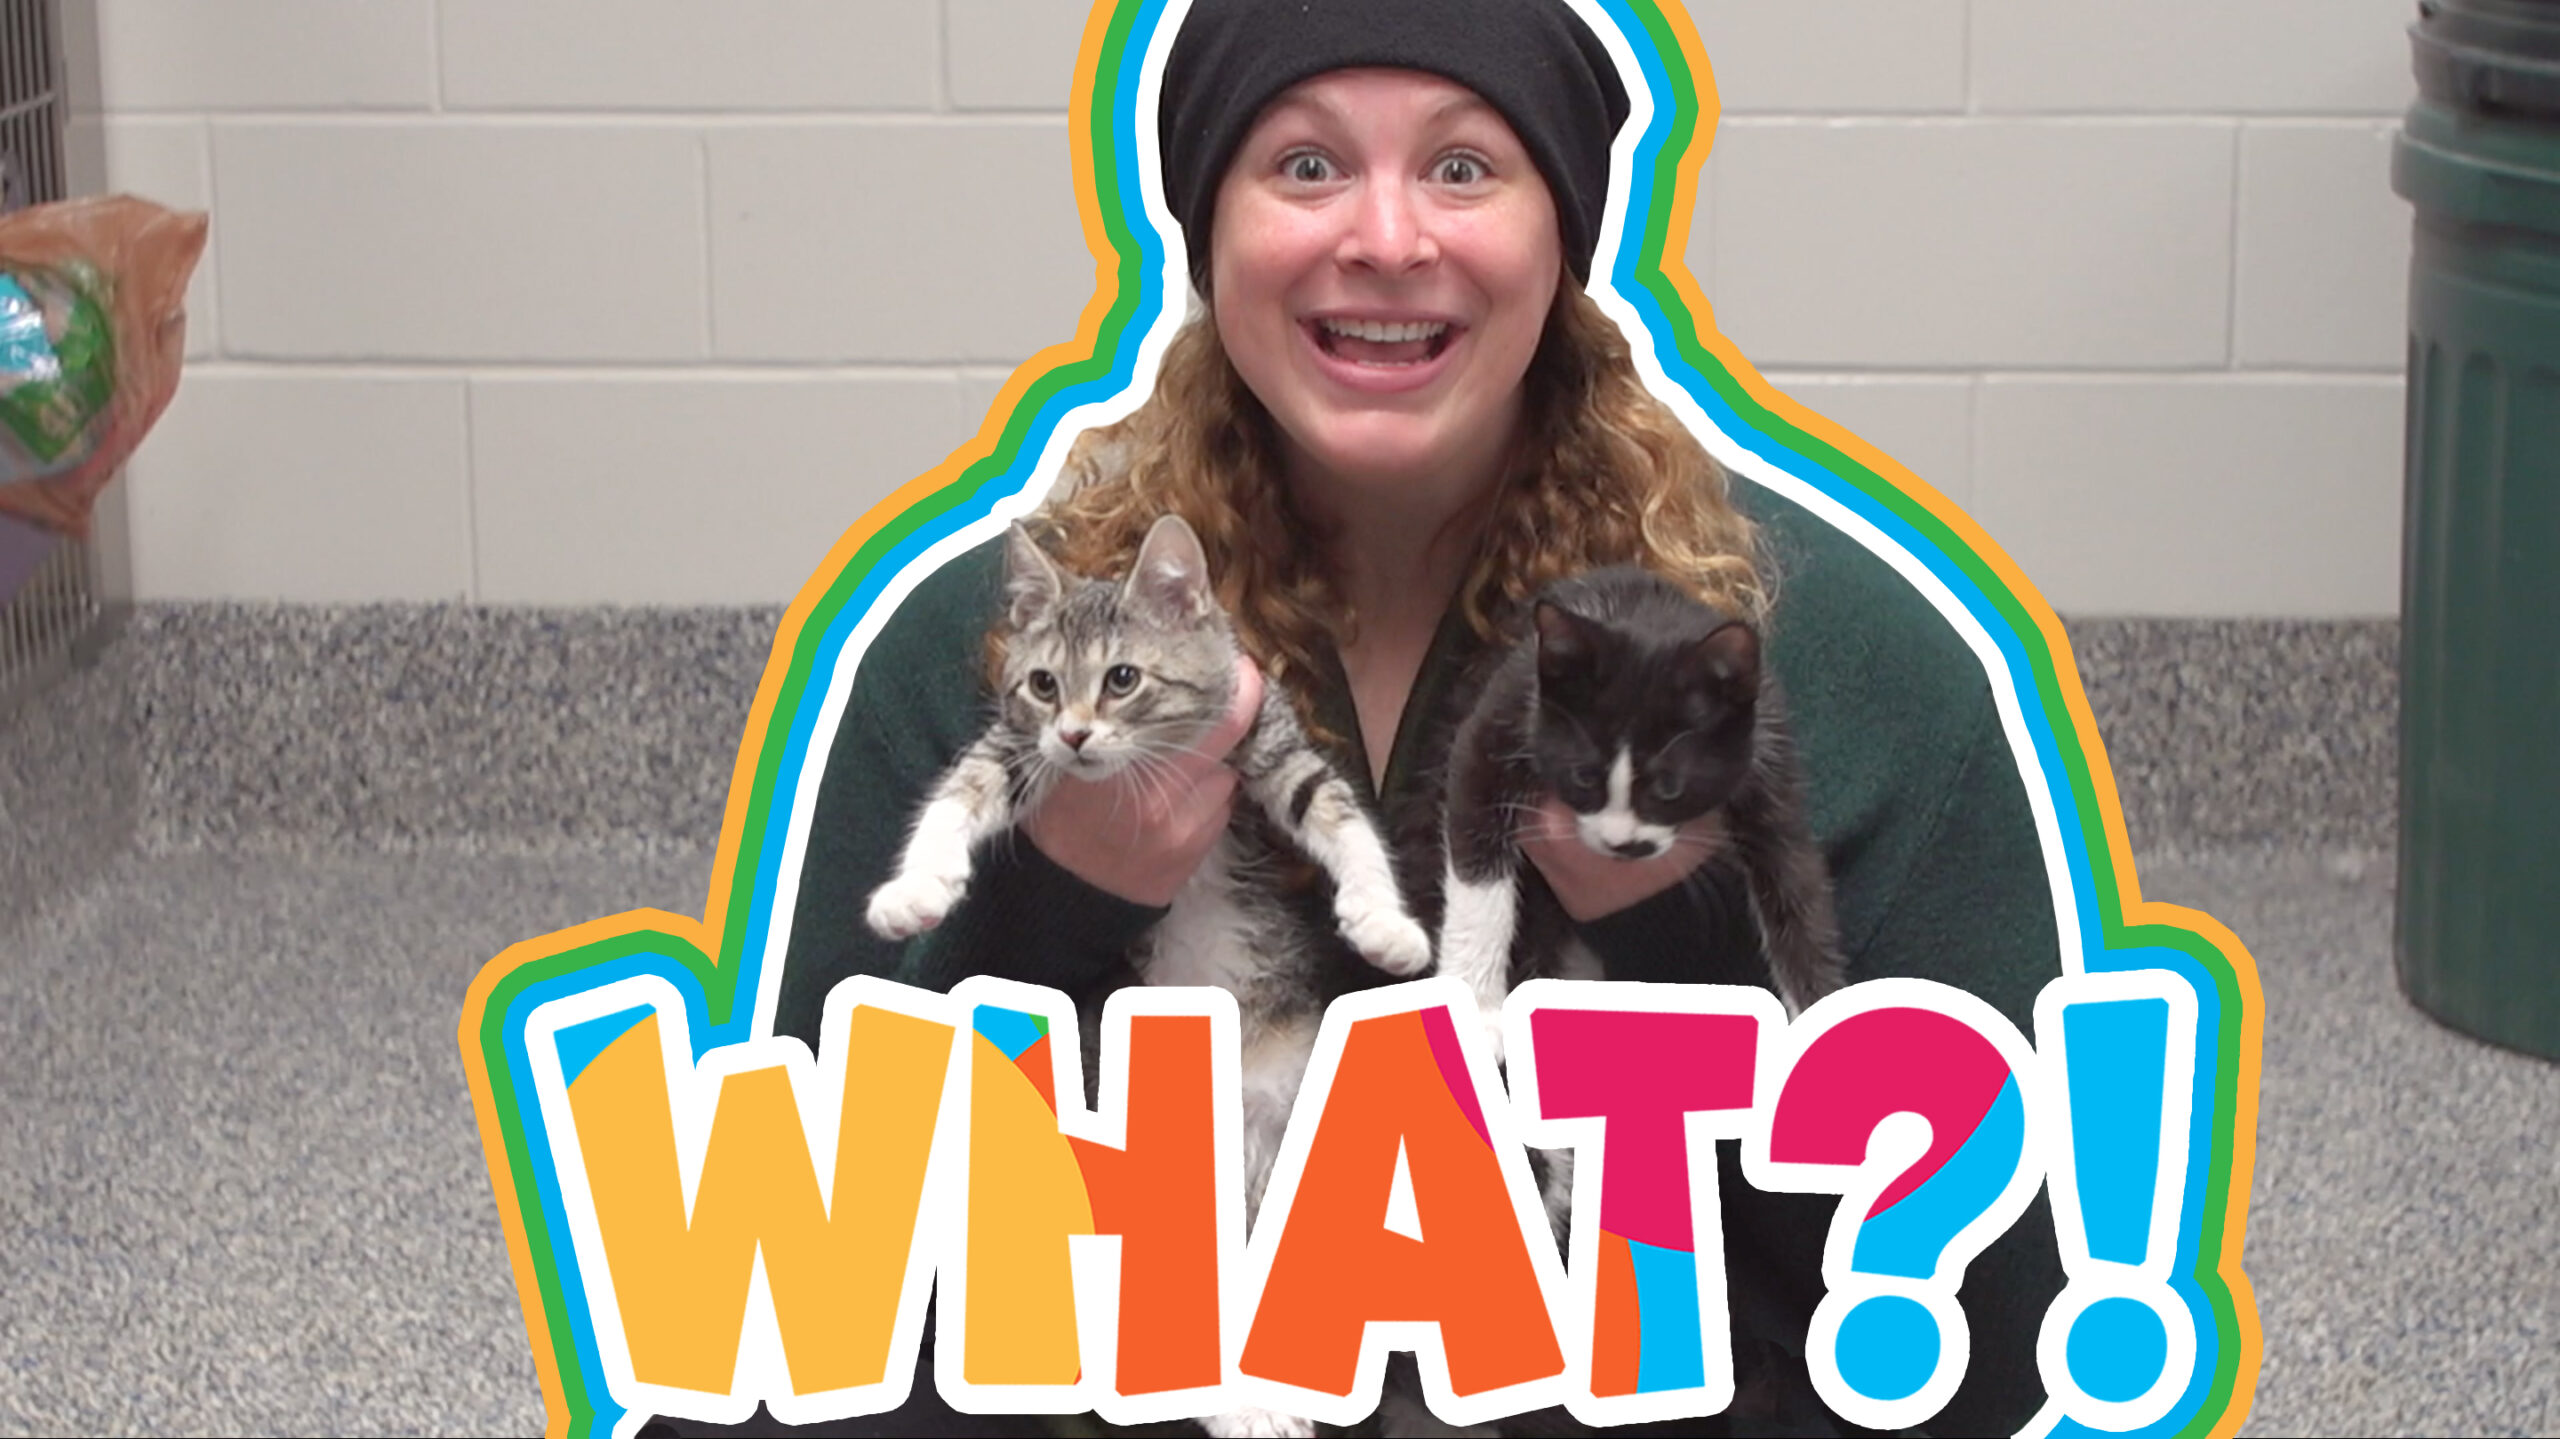 What?! Jen Indovina holds up 2 kittens as she explores being a vet.